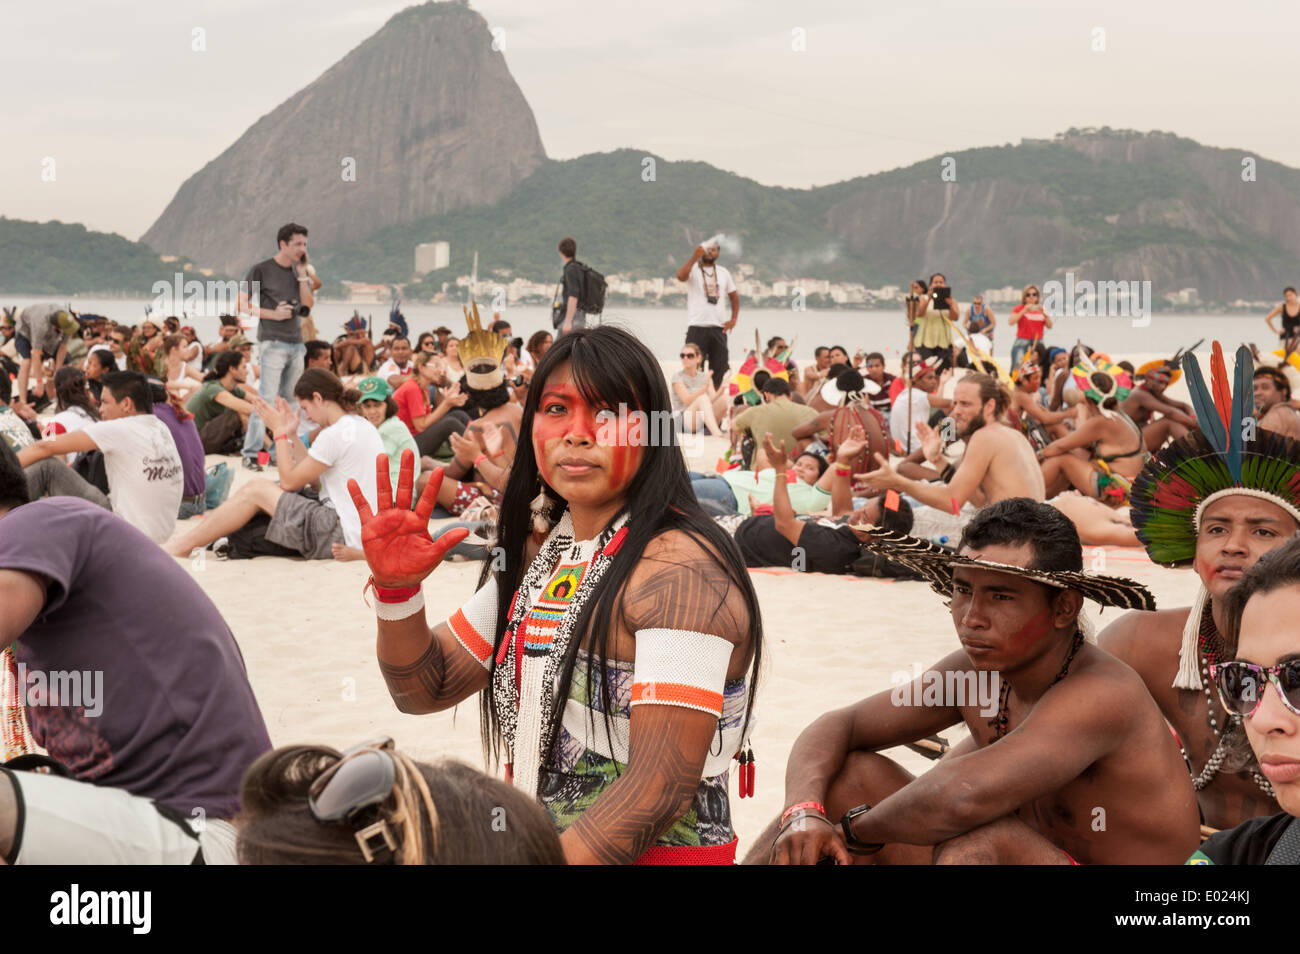 The People's Summit at the United Nations Conference on Sustainable Development (Rio+20), Rio de Janeiro, Brazil. Mayalu Txukaramae Kayapo shows a red painted hand against the building of dams in the Amazon, during the Human Banner demonstration on the beach with the sugar loaf mountain behind. 19th June 2012. Photo © Sue Cunningham. Stock Photo